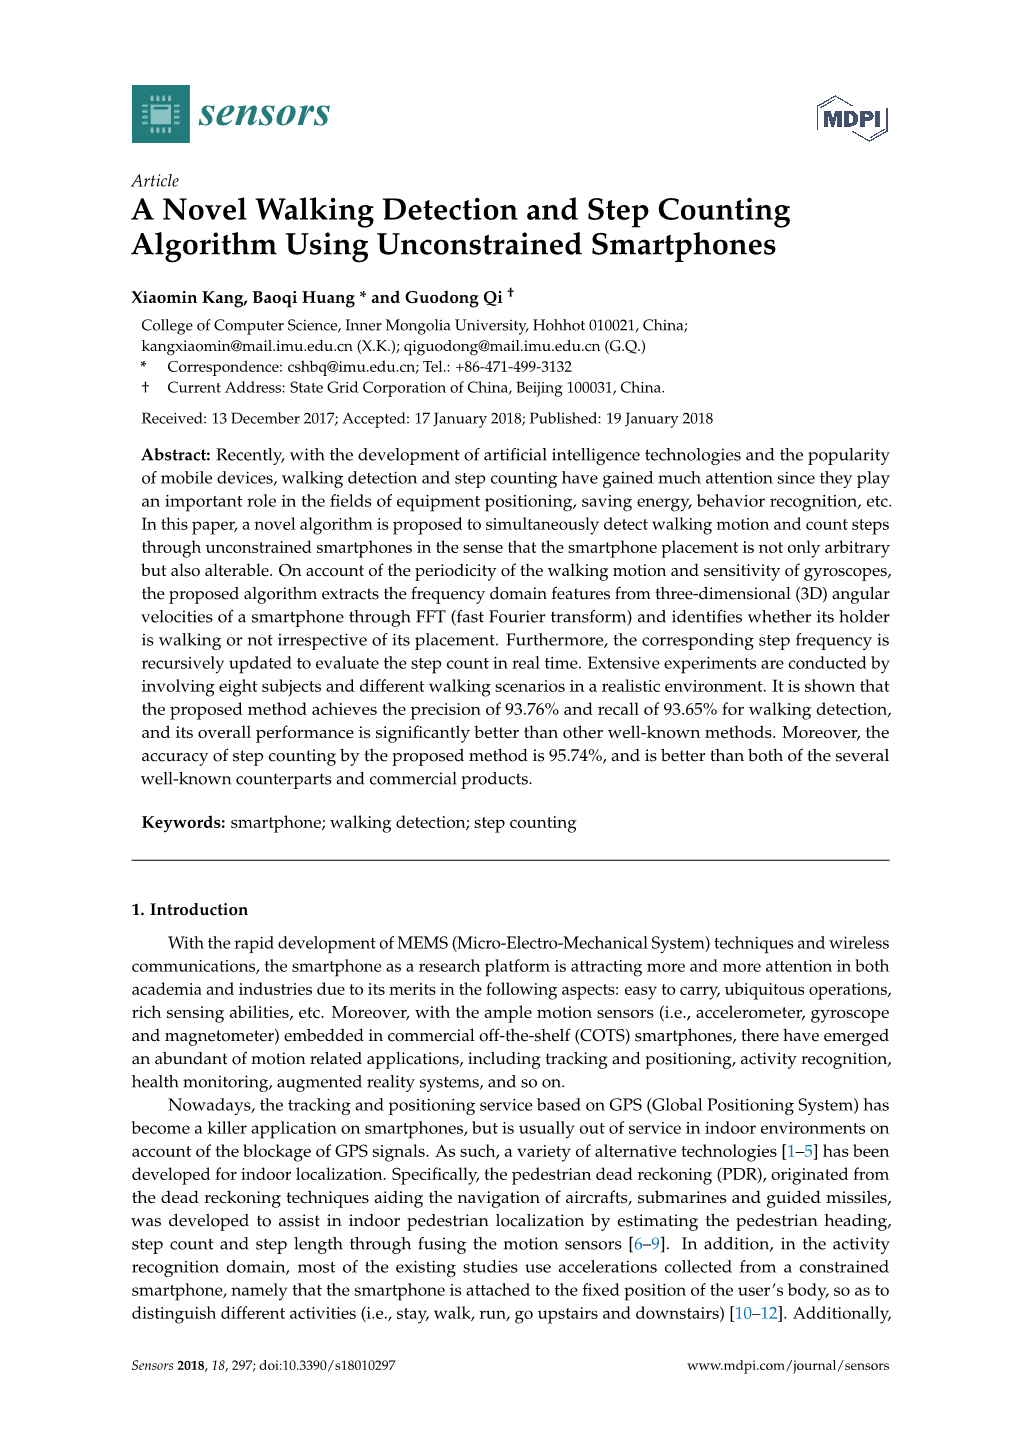 A Novel Walking Detection and Step Counting Algorithm Using Unconstrained Smartphones